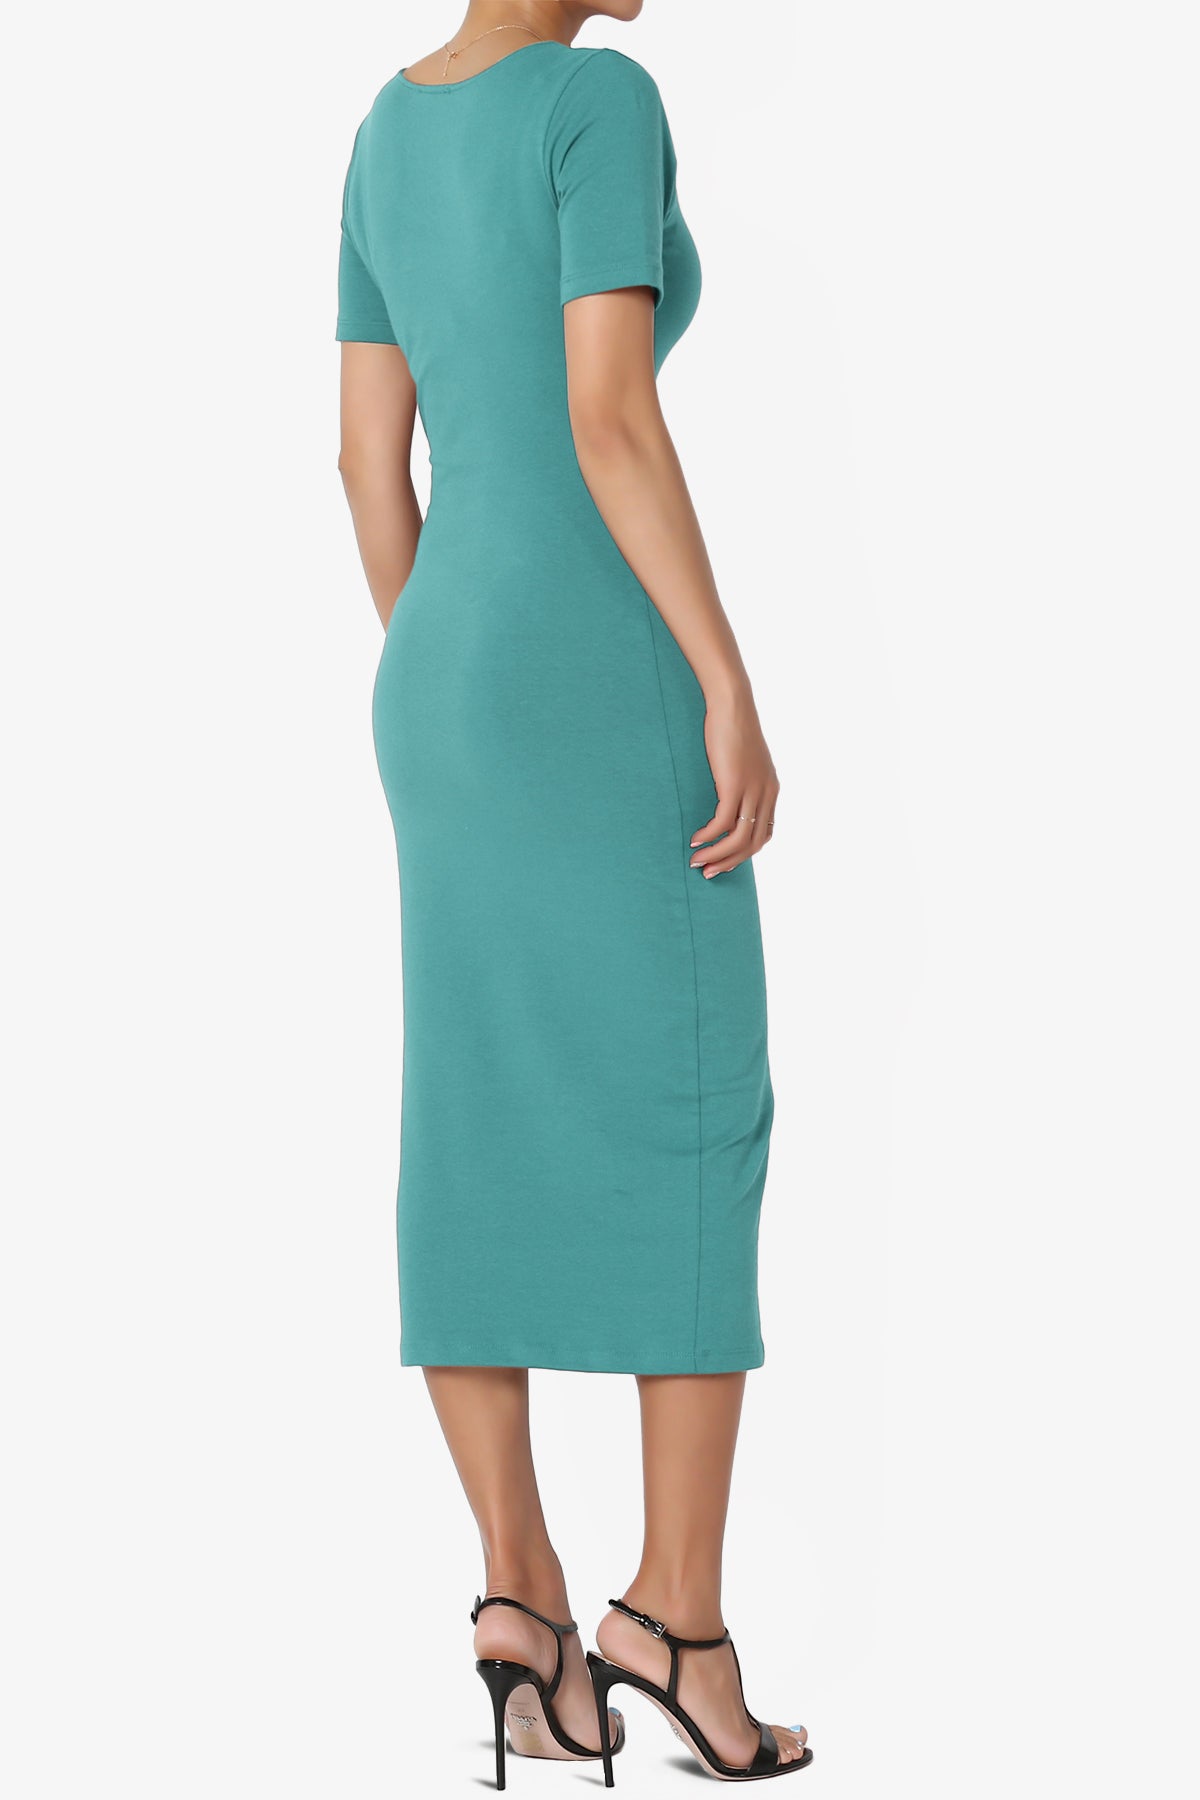 Load image into Gallery viewer, Fontella Short Sleeve Square Neck Bodycon Dress DUSTY TEAL_4
